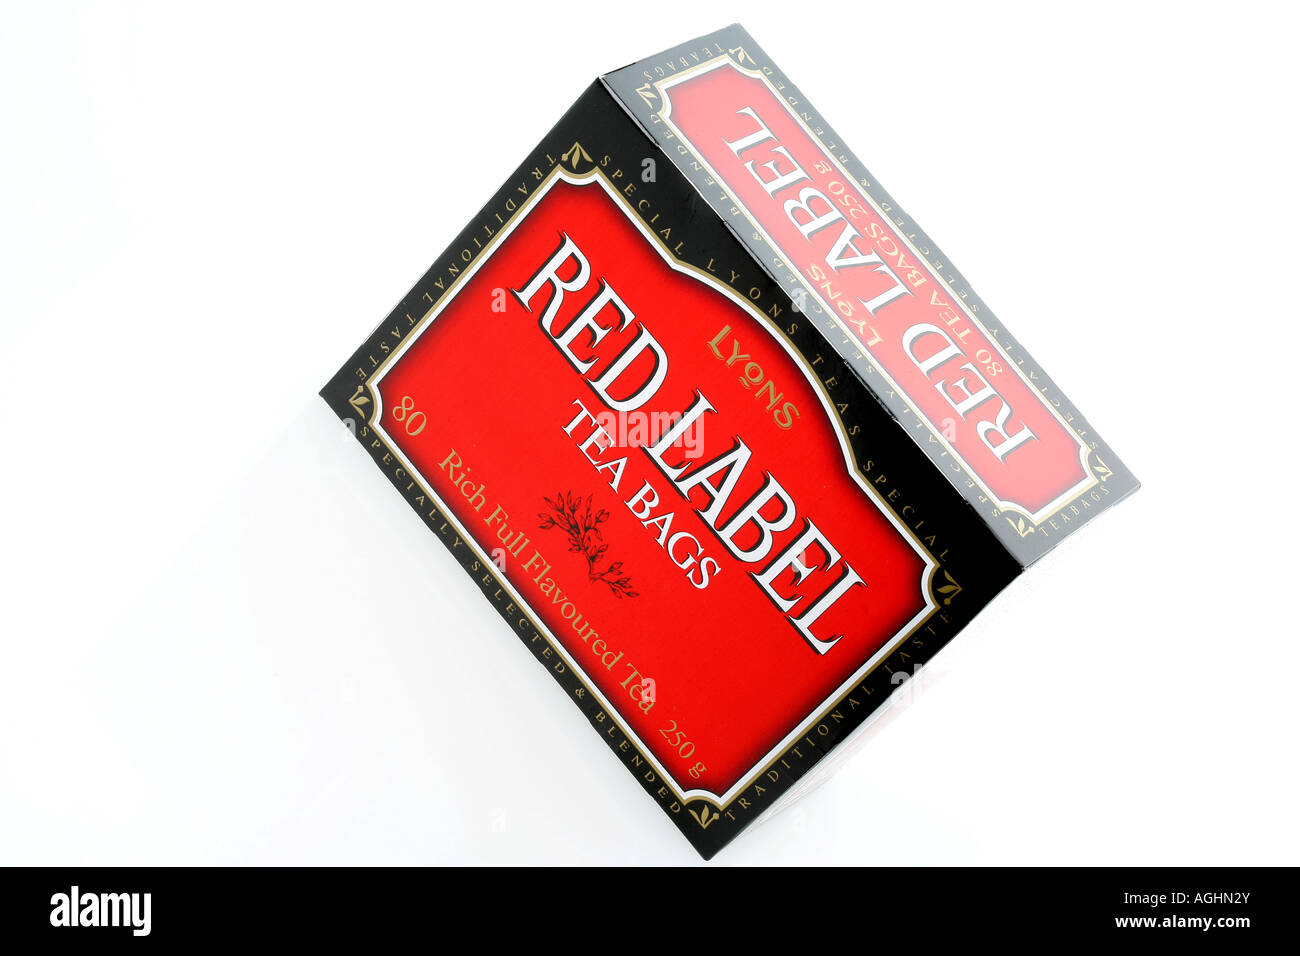 Branded Carton Or Box Of Lyons Red Label Tea Bags Isolated Against A White  Background With No People And A Clipping Path Stock Photo - Alamy